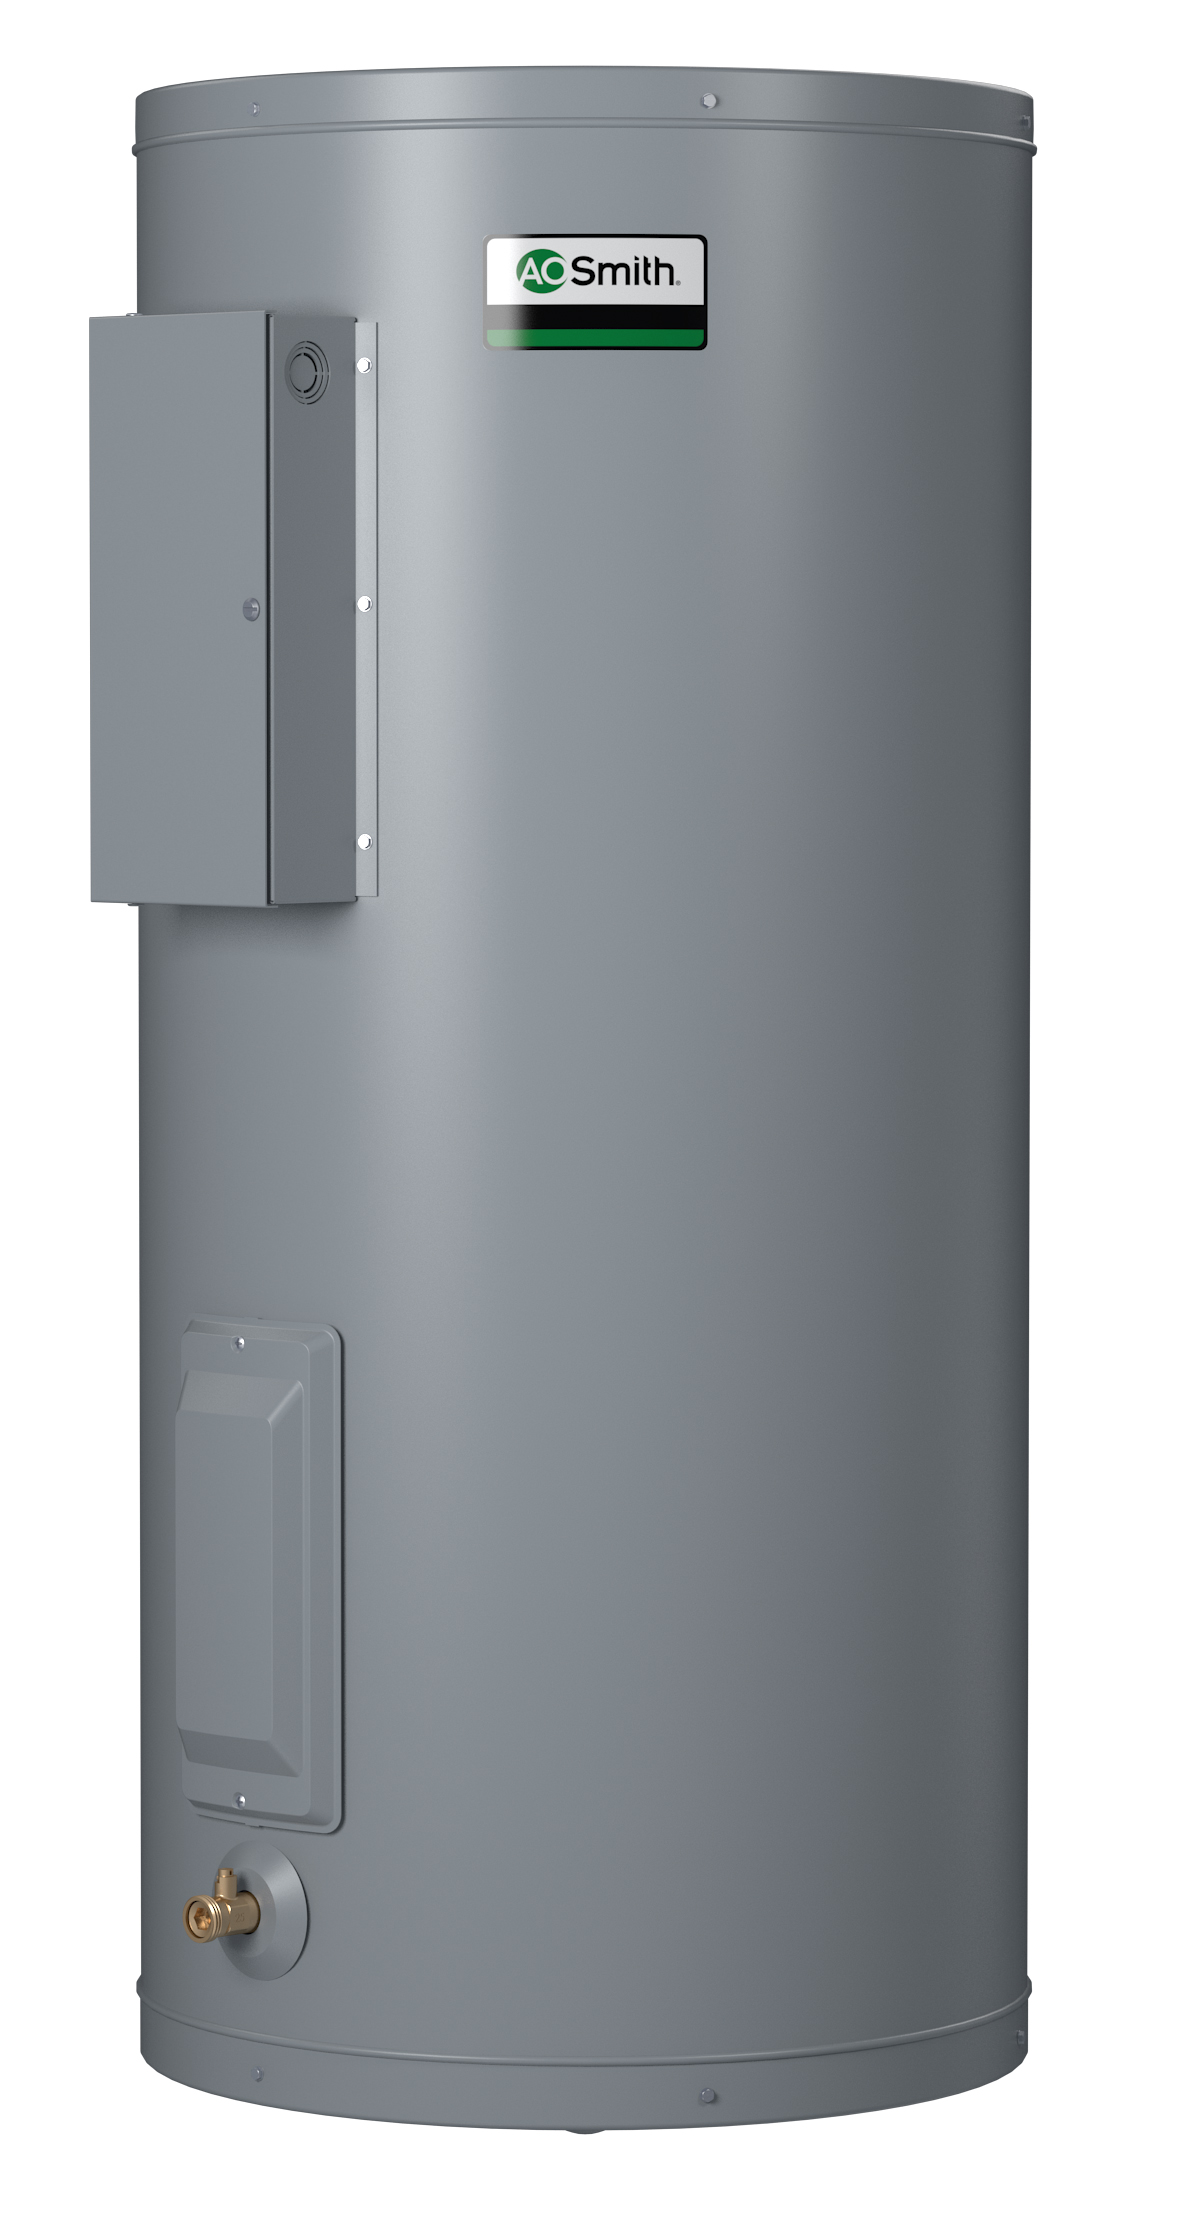 AO SMITH DEN-120D: 120 GALLONS, 2.0KW, 480 VOLT, 3 PHASE, (2-2000 WATT ELEMENTS, NON-SIMULTANEOUS WIRING), DURA-POWER, LIGHT DUTY COMMERCIAL ELECTRIC WATER HEATER